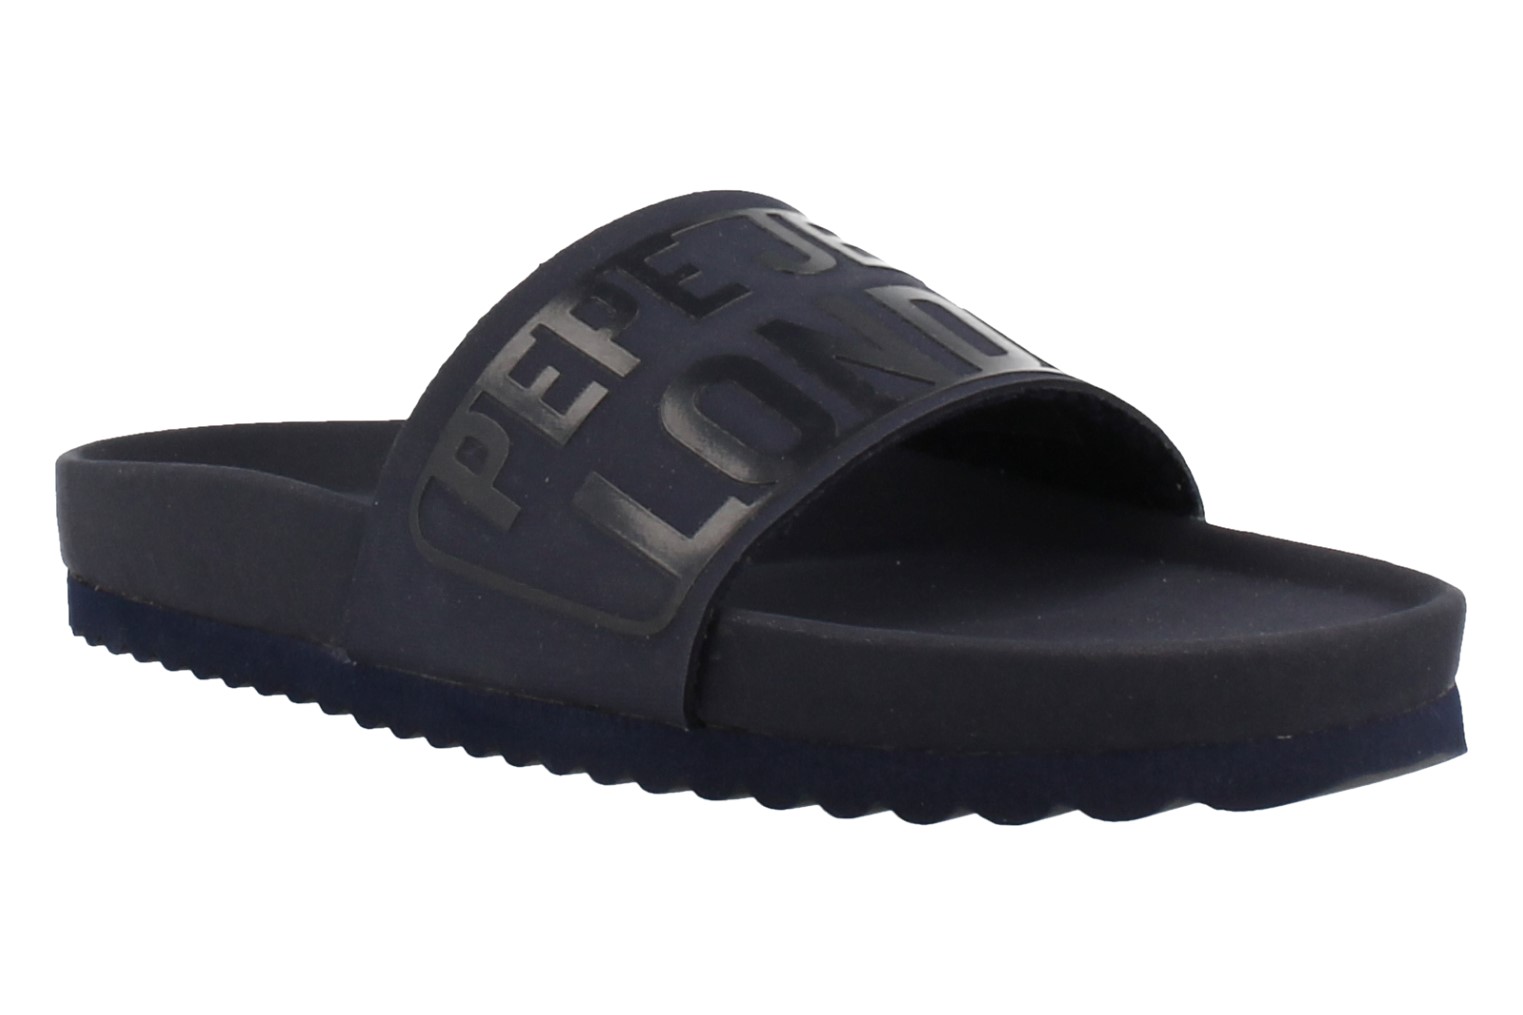 pepe jeans slippers